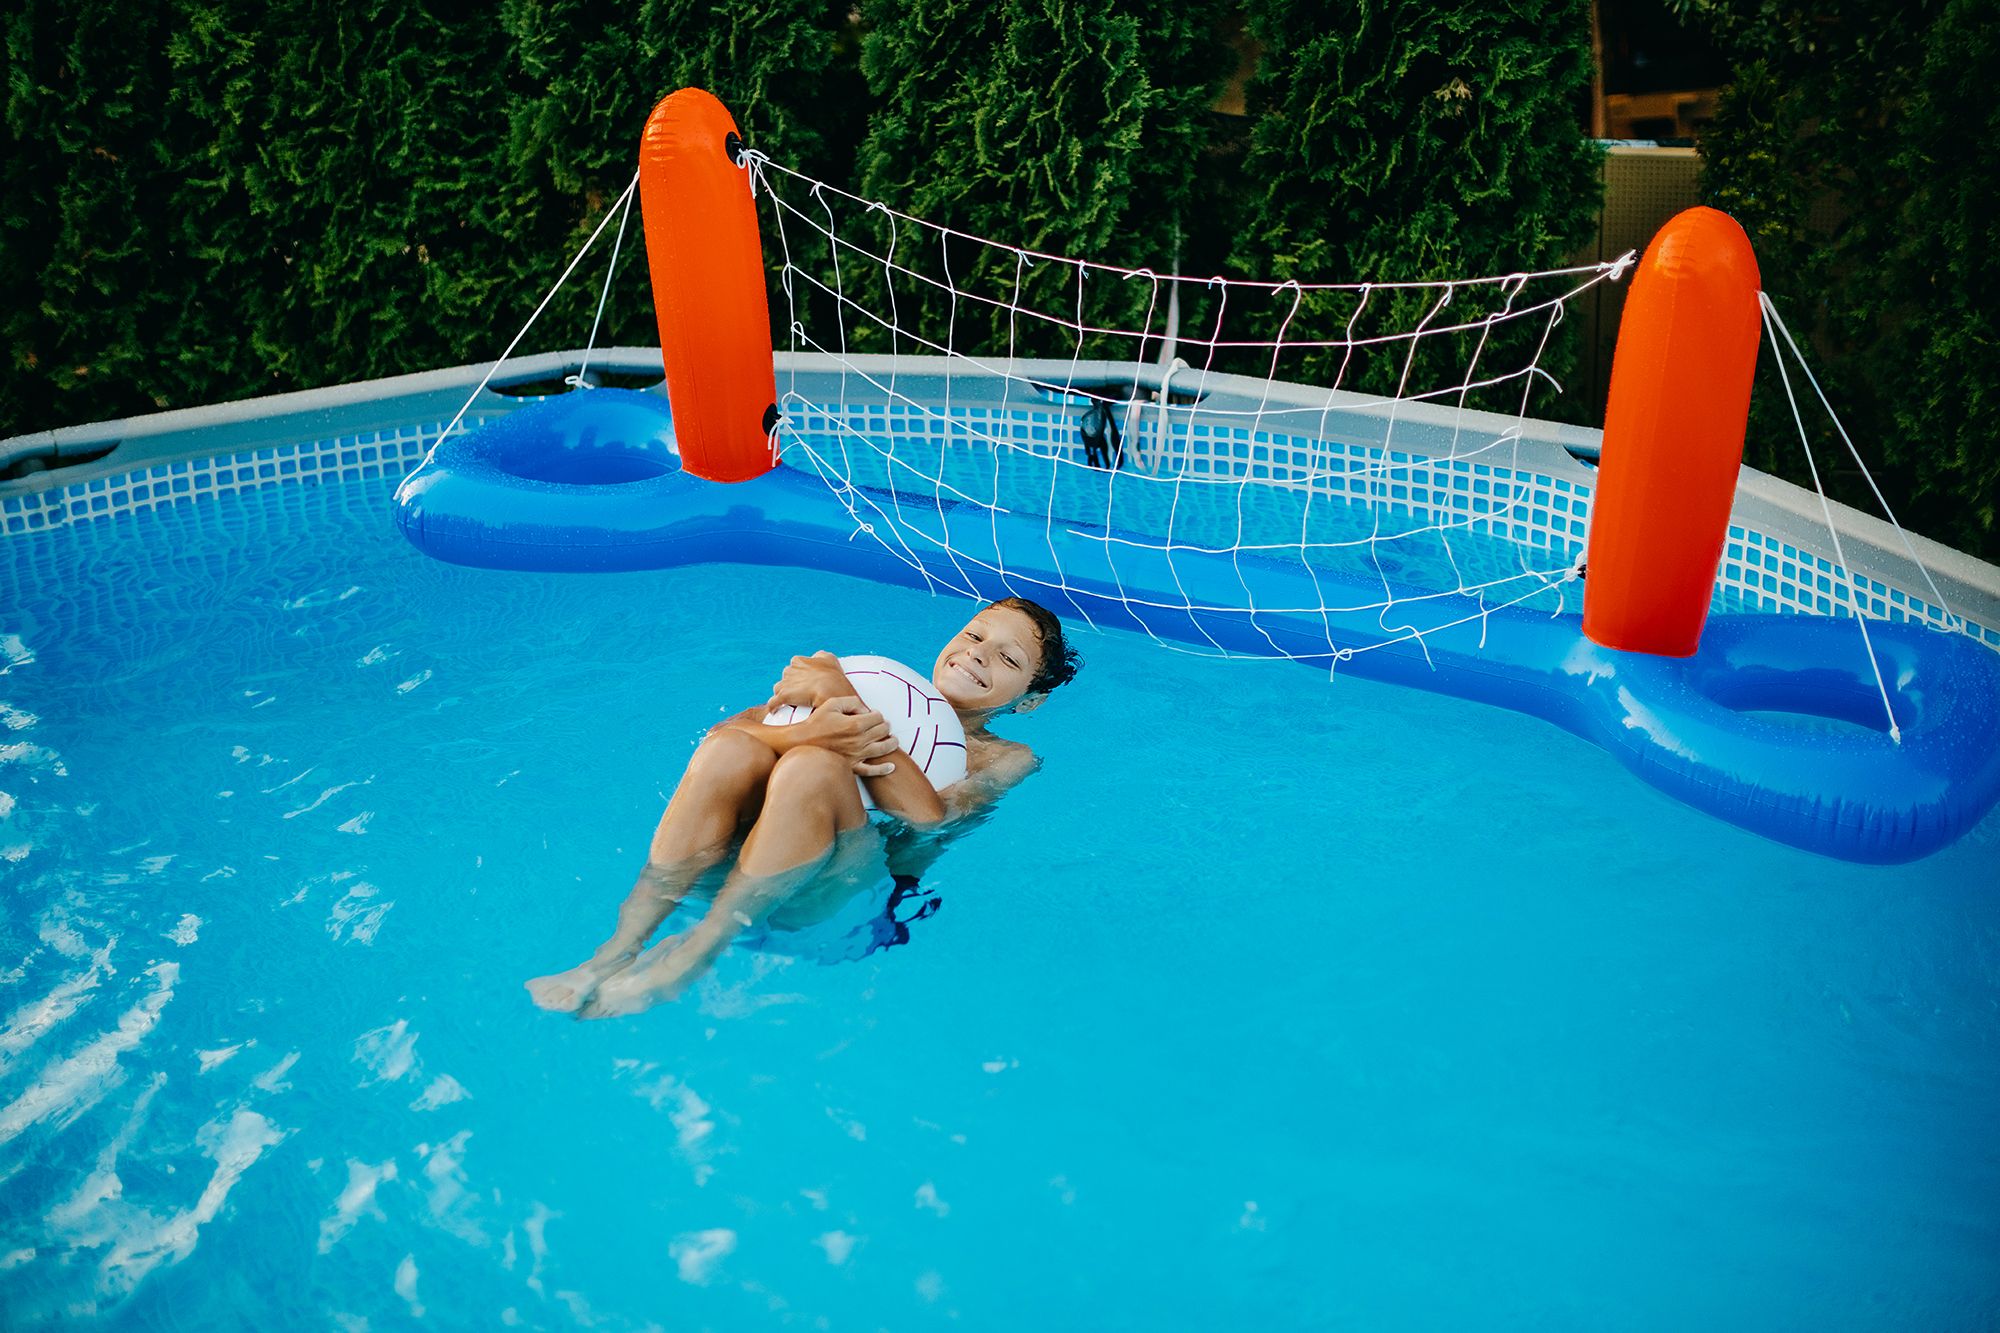 5 Fun Pool Games: No Gear Required